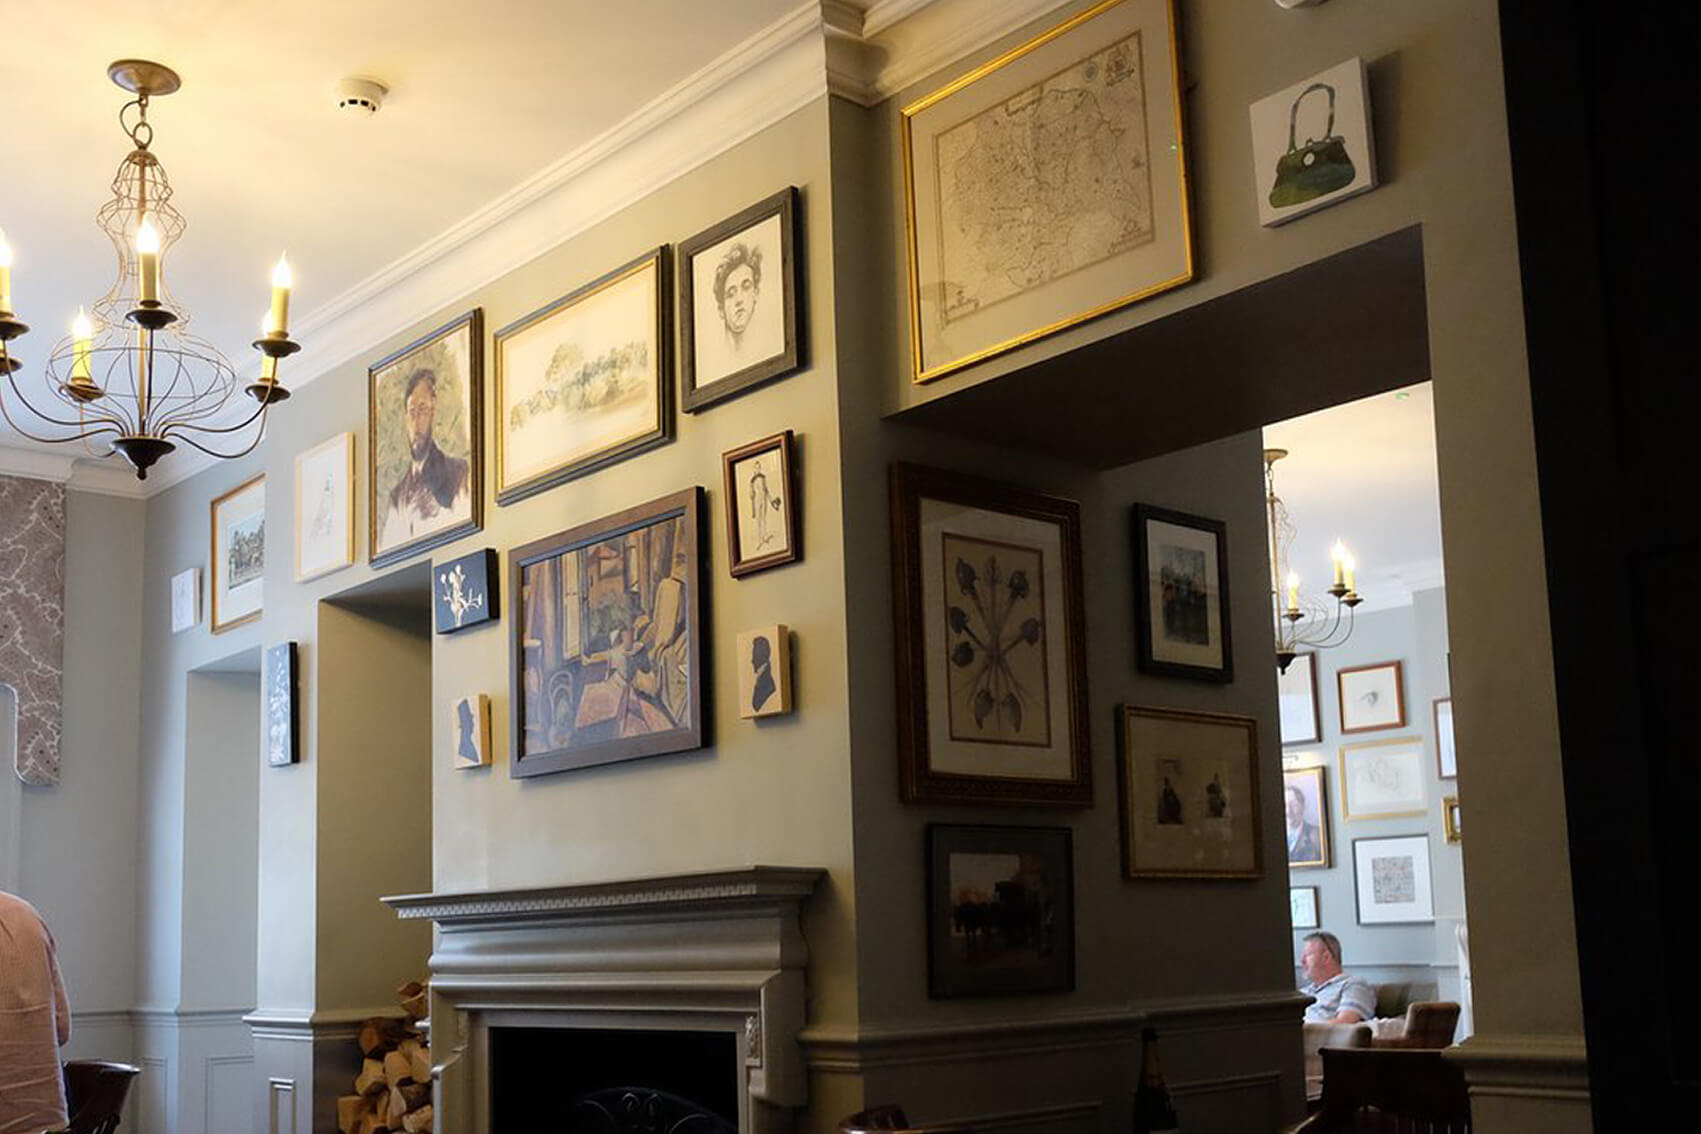 Beverley Arms Hotel, Yorkshire Dales, gallery wall, traditional artwork, traditional paintings, illustrations, graphics, mixed artwork, interiors, interior design, framed artwork, commissioned collection